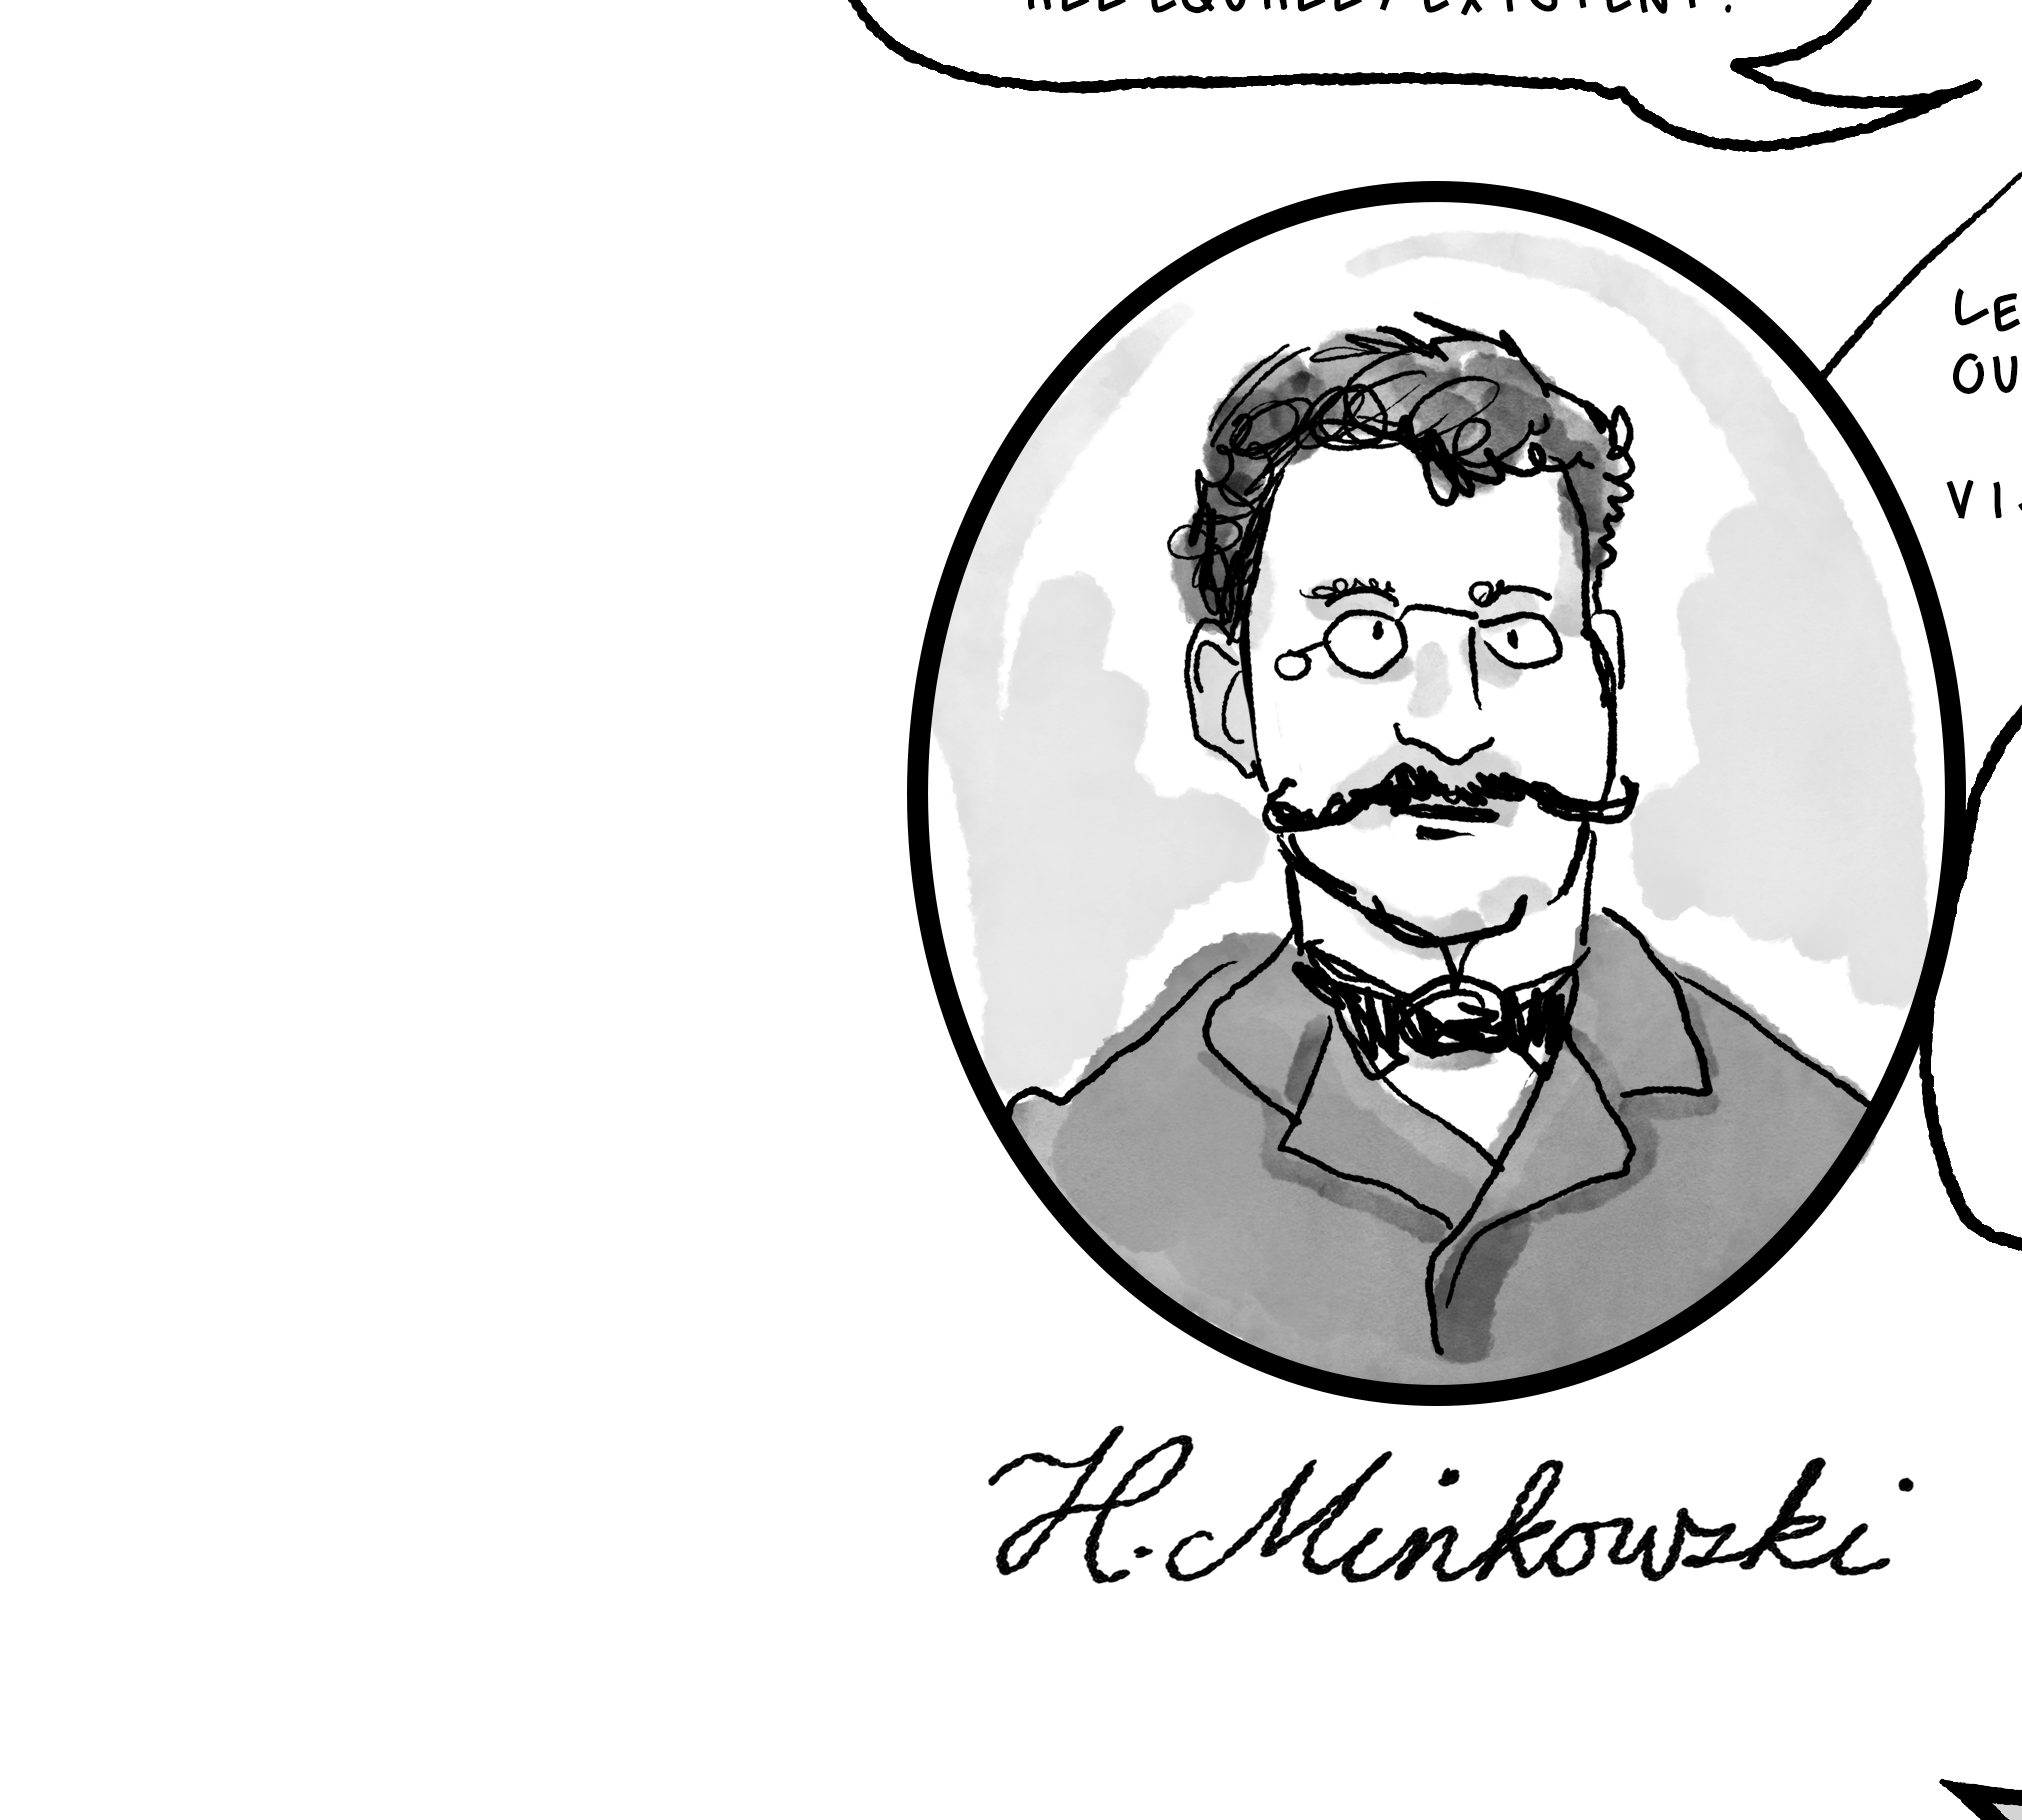 A portrait of H. Minkowski, his name written in old-timey cursive, sits in an oval drawn in black and white. He is a curly-haired chap with a twisted-up mustache and some old-timey circular glasses. He is wearing a stiff-collared shirt and bowtie with a wooly jacket.